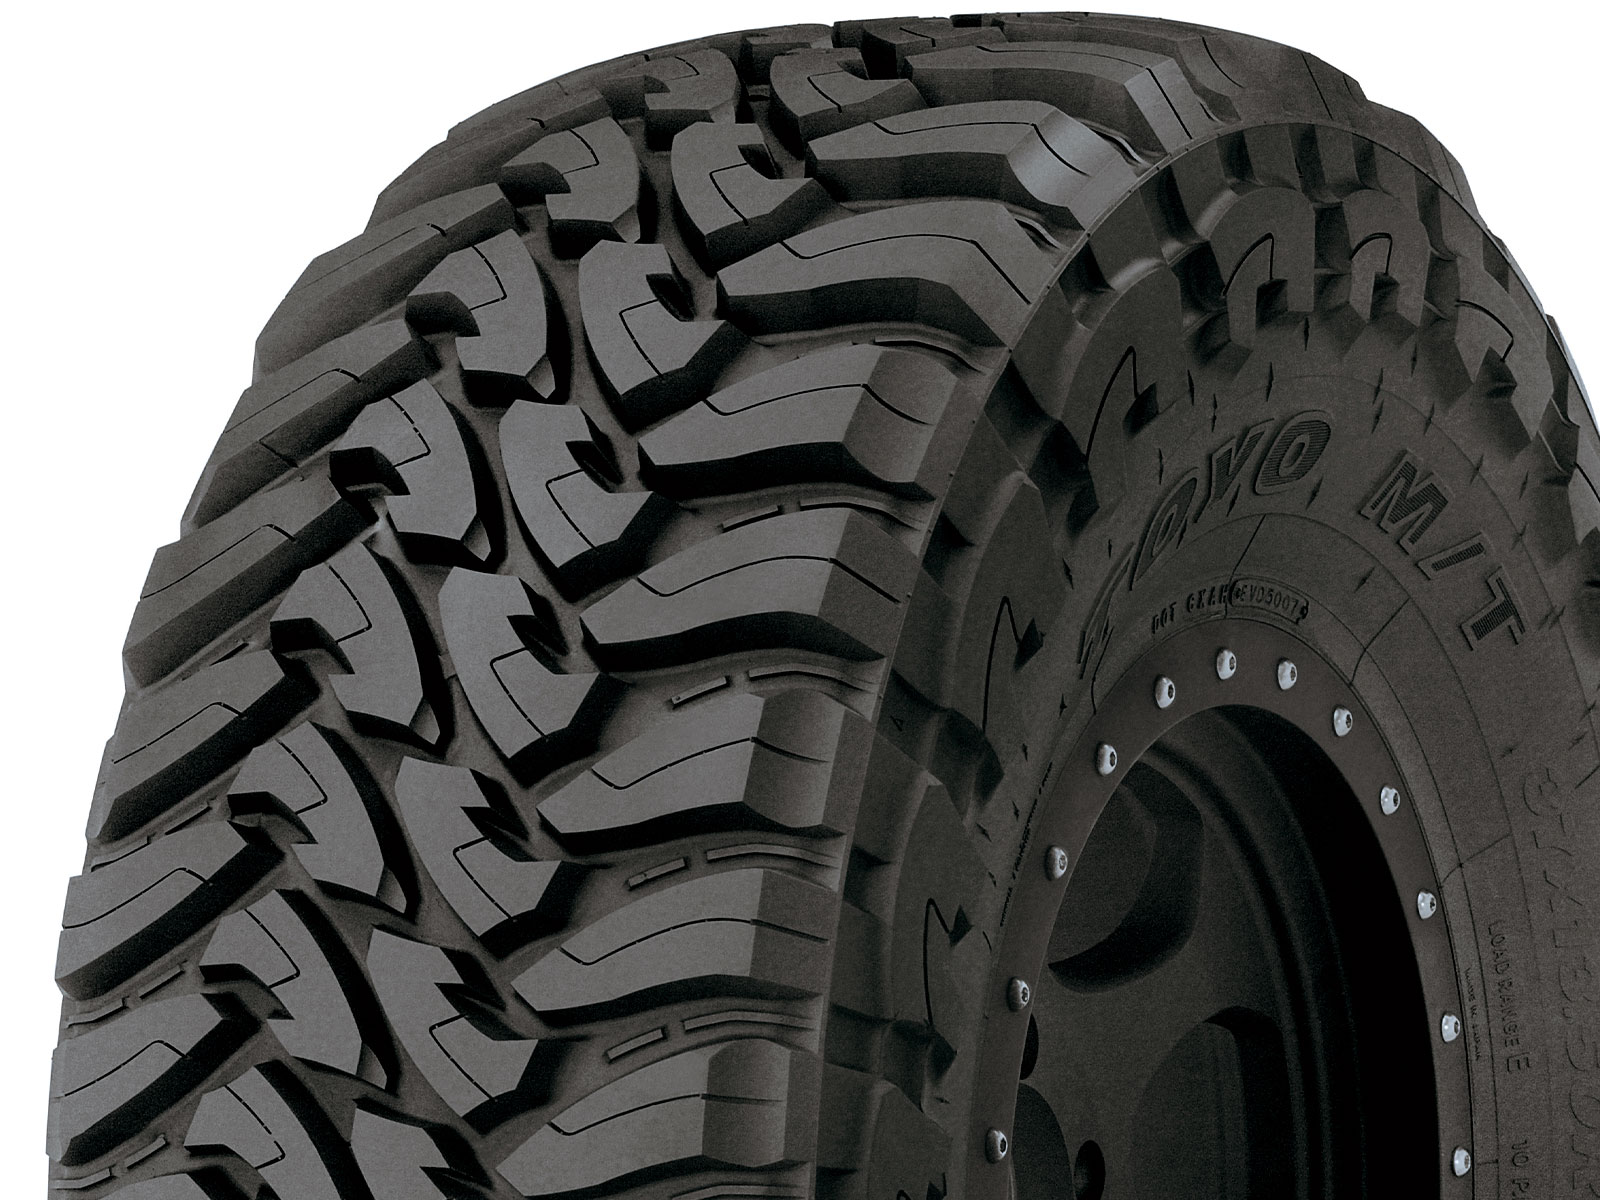 Toyo Open Country M/T Tires | RealTruck